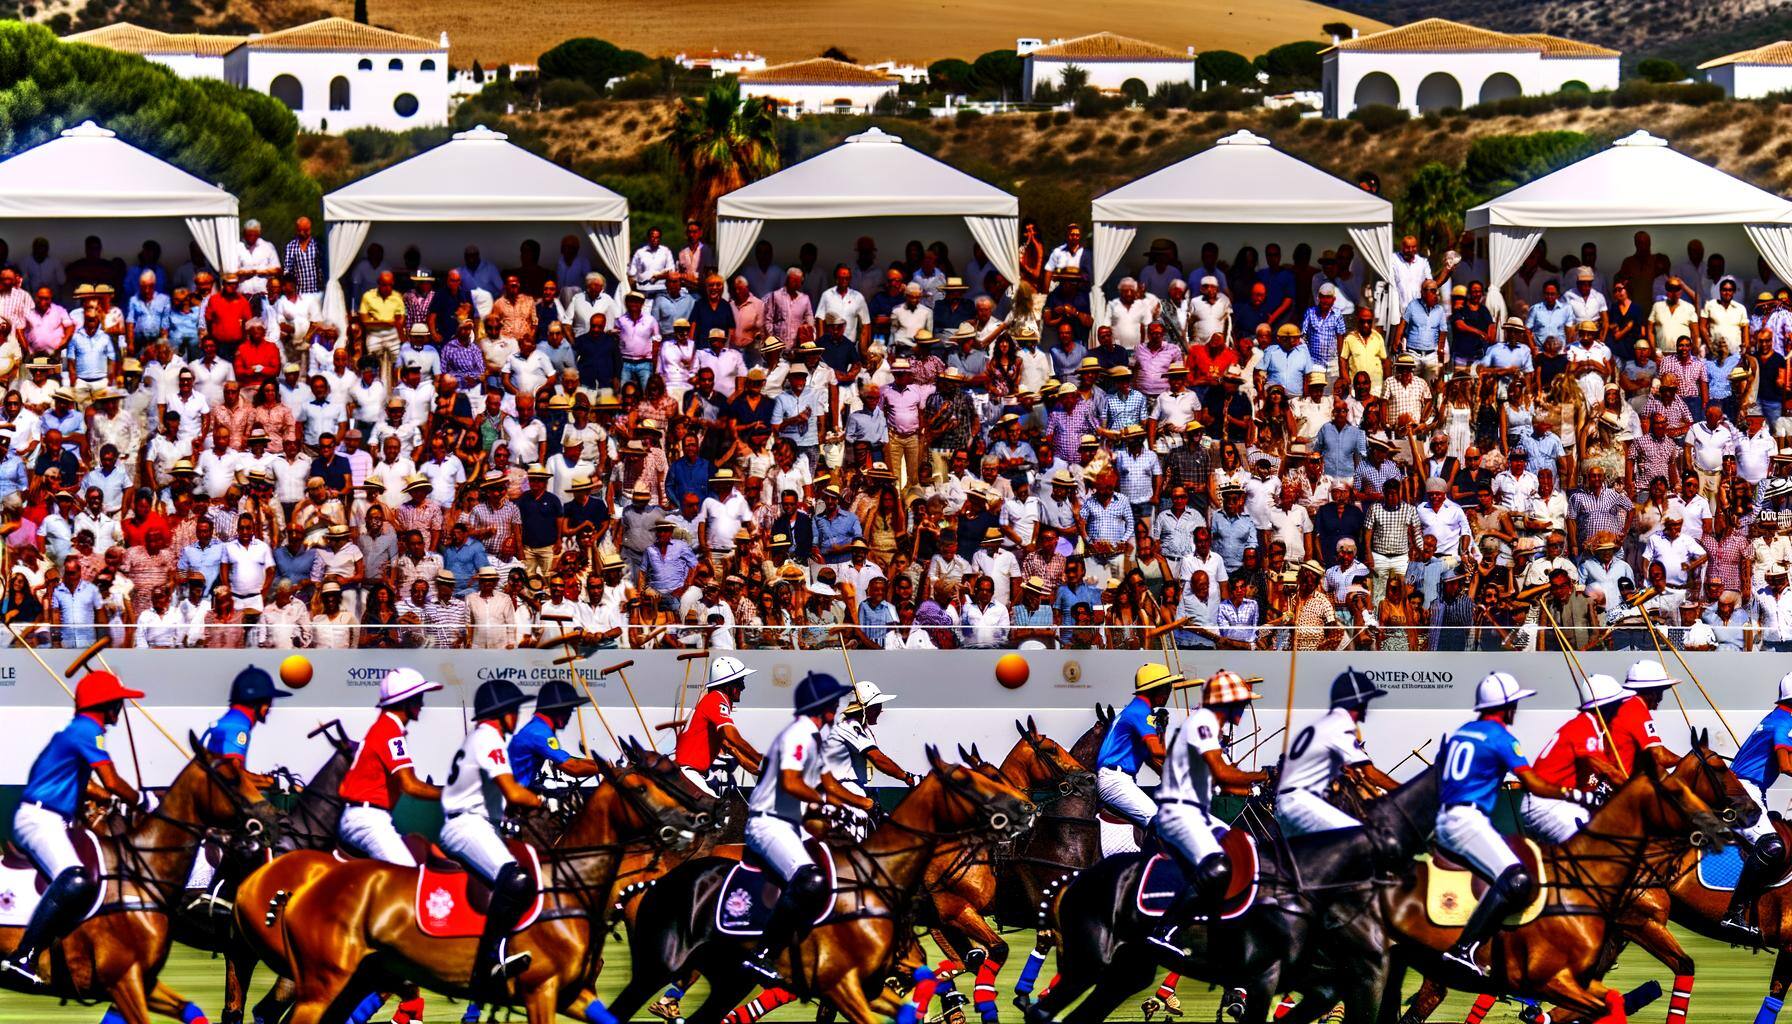 International Polo Tournament of Andalusia